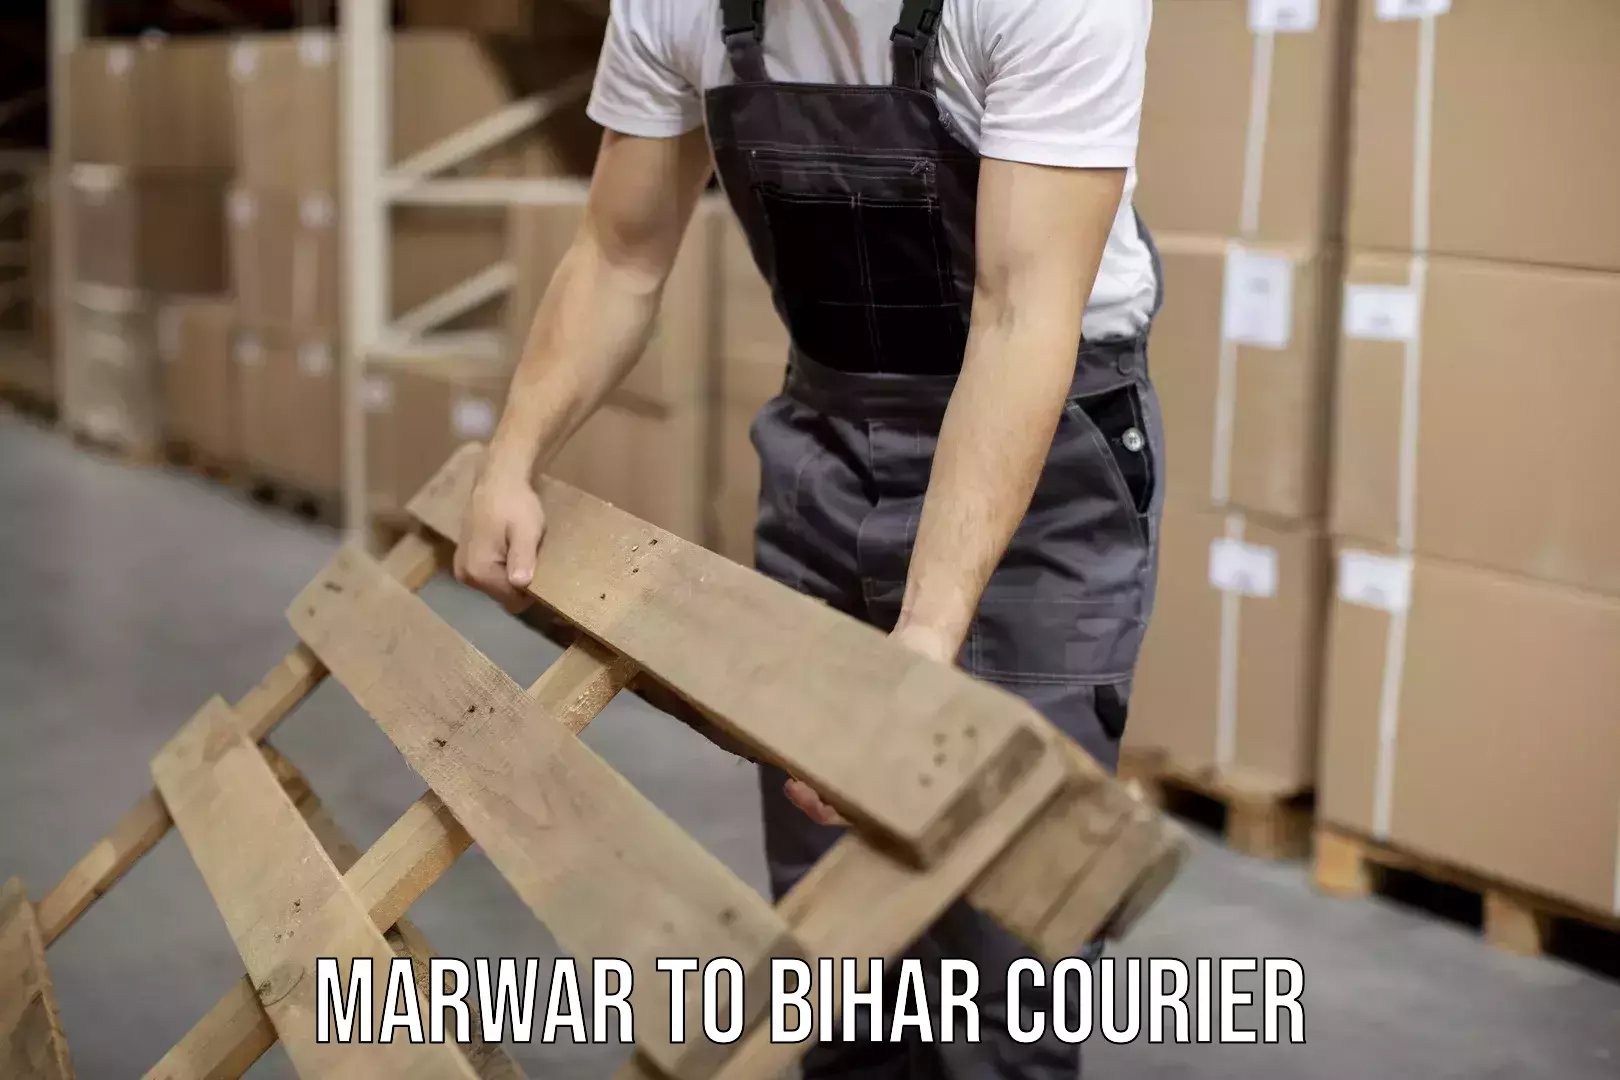 Courier service efficiency Marwar to Punsia